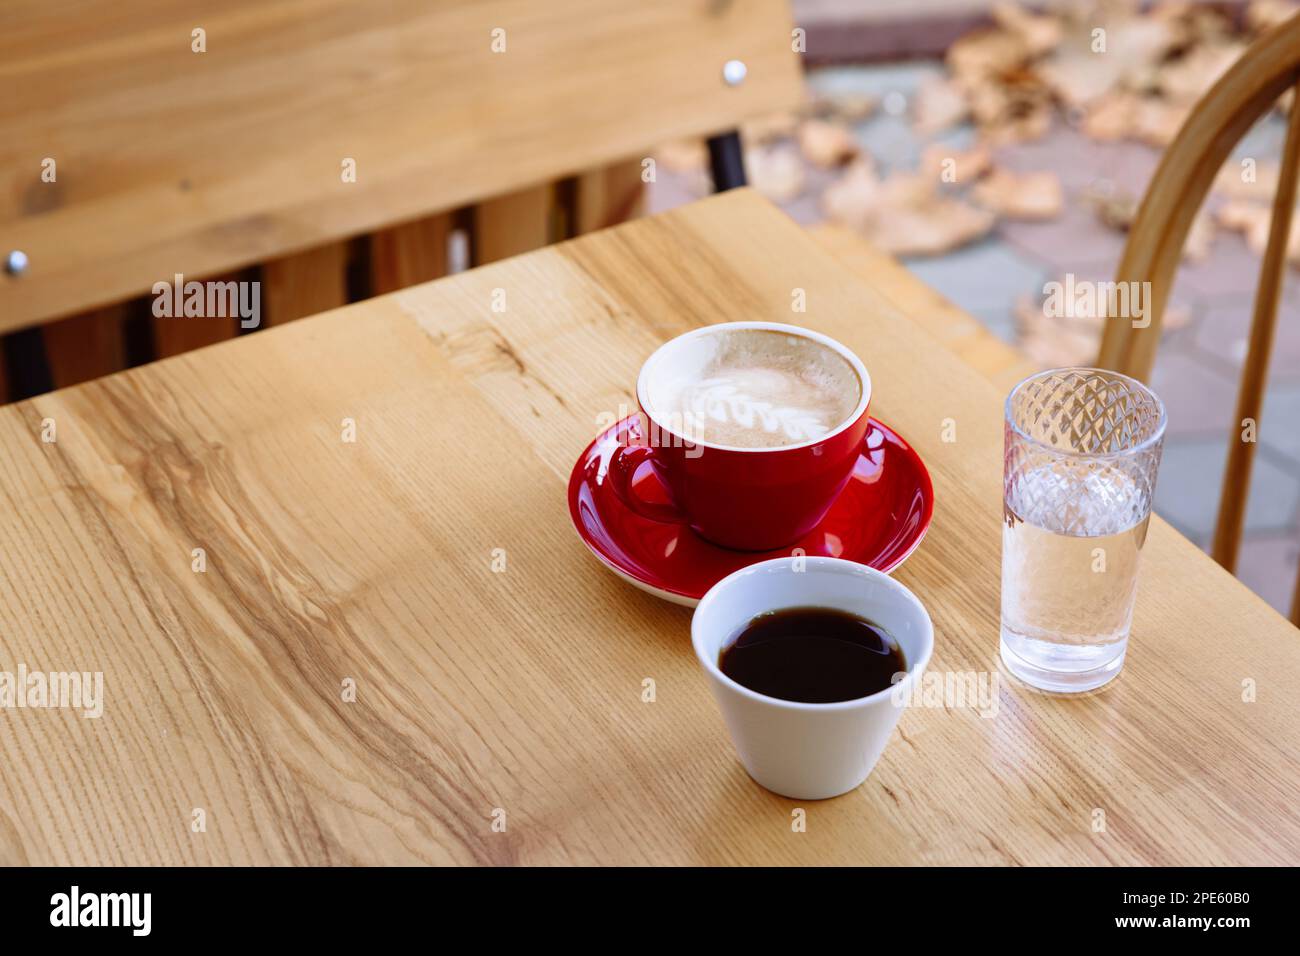 Aromatic coffee in a red cup with milk foam and latte art and freshly brewed coffee in a white cup. Nearby is a glass of water.Enjoyment of hot aroma beverage on fresh air. Stock Photo